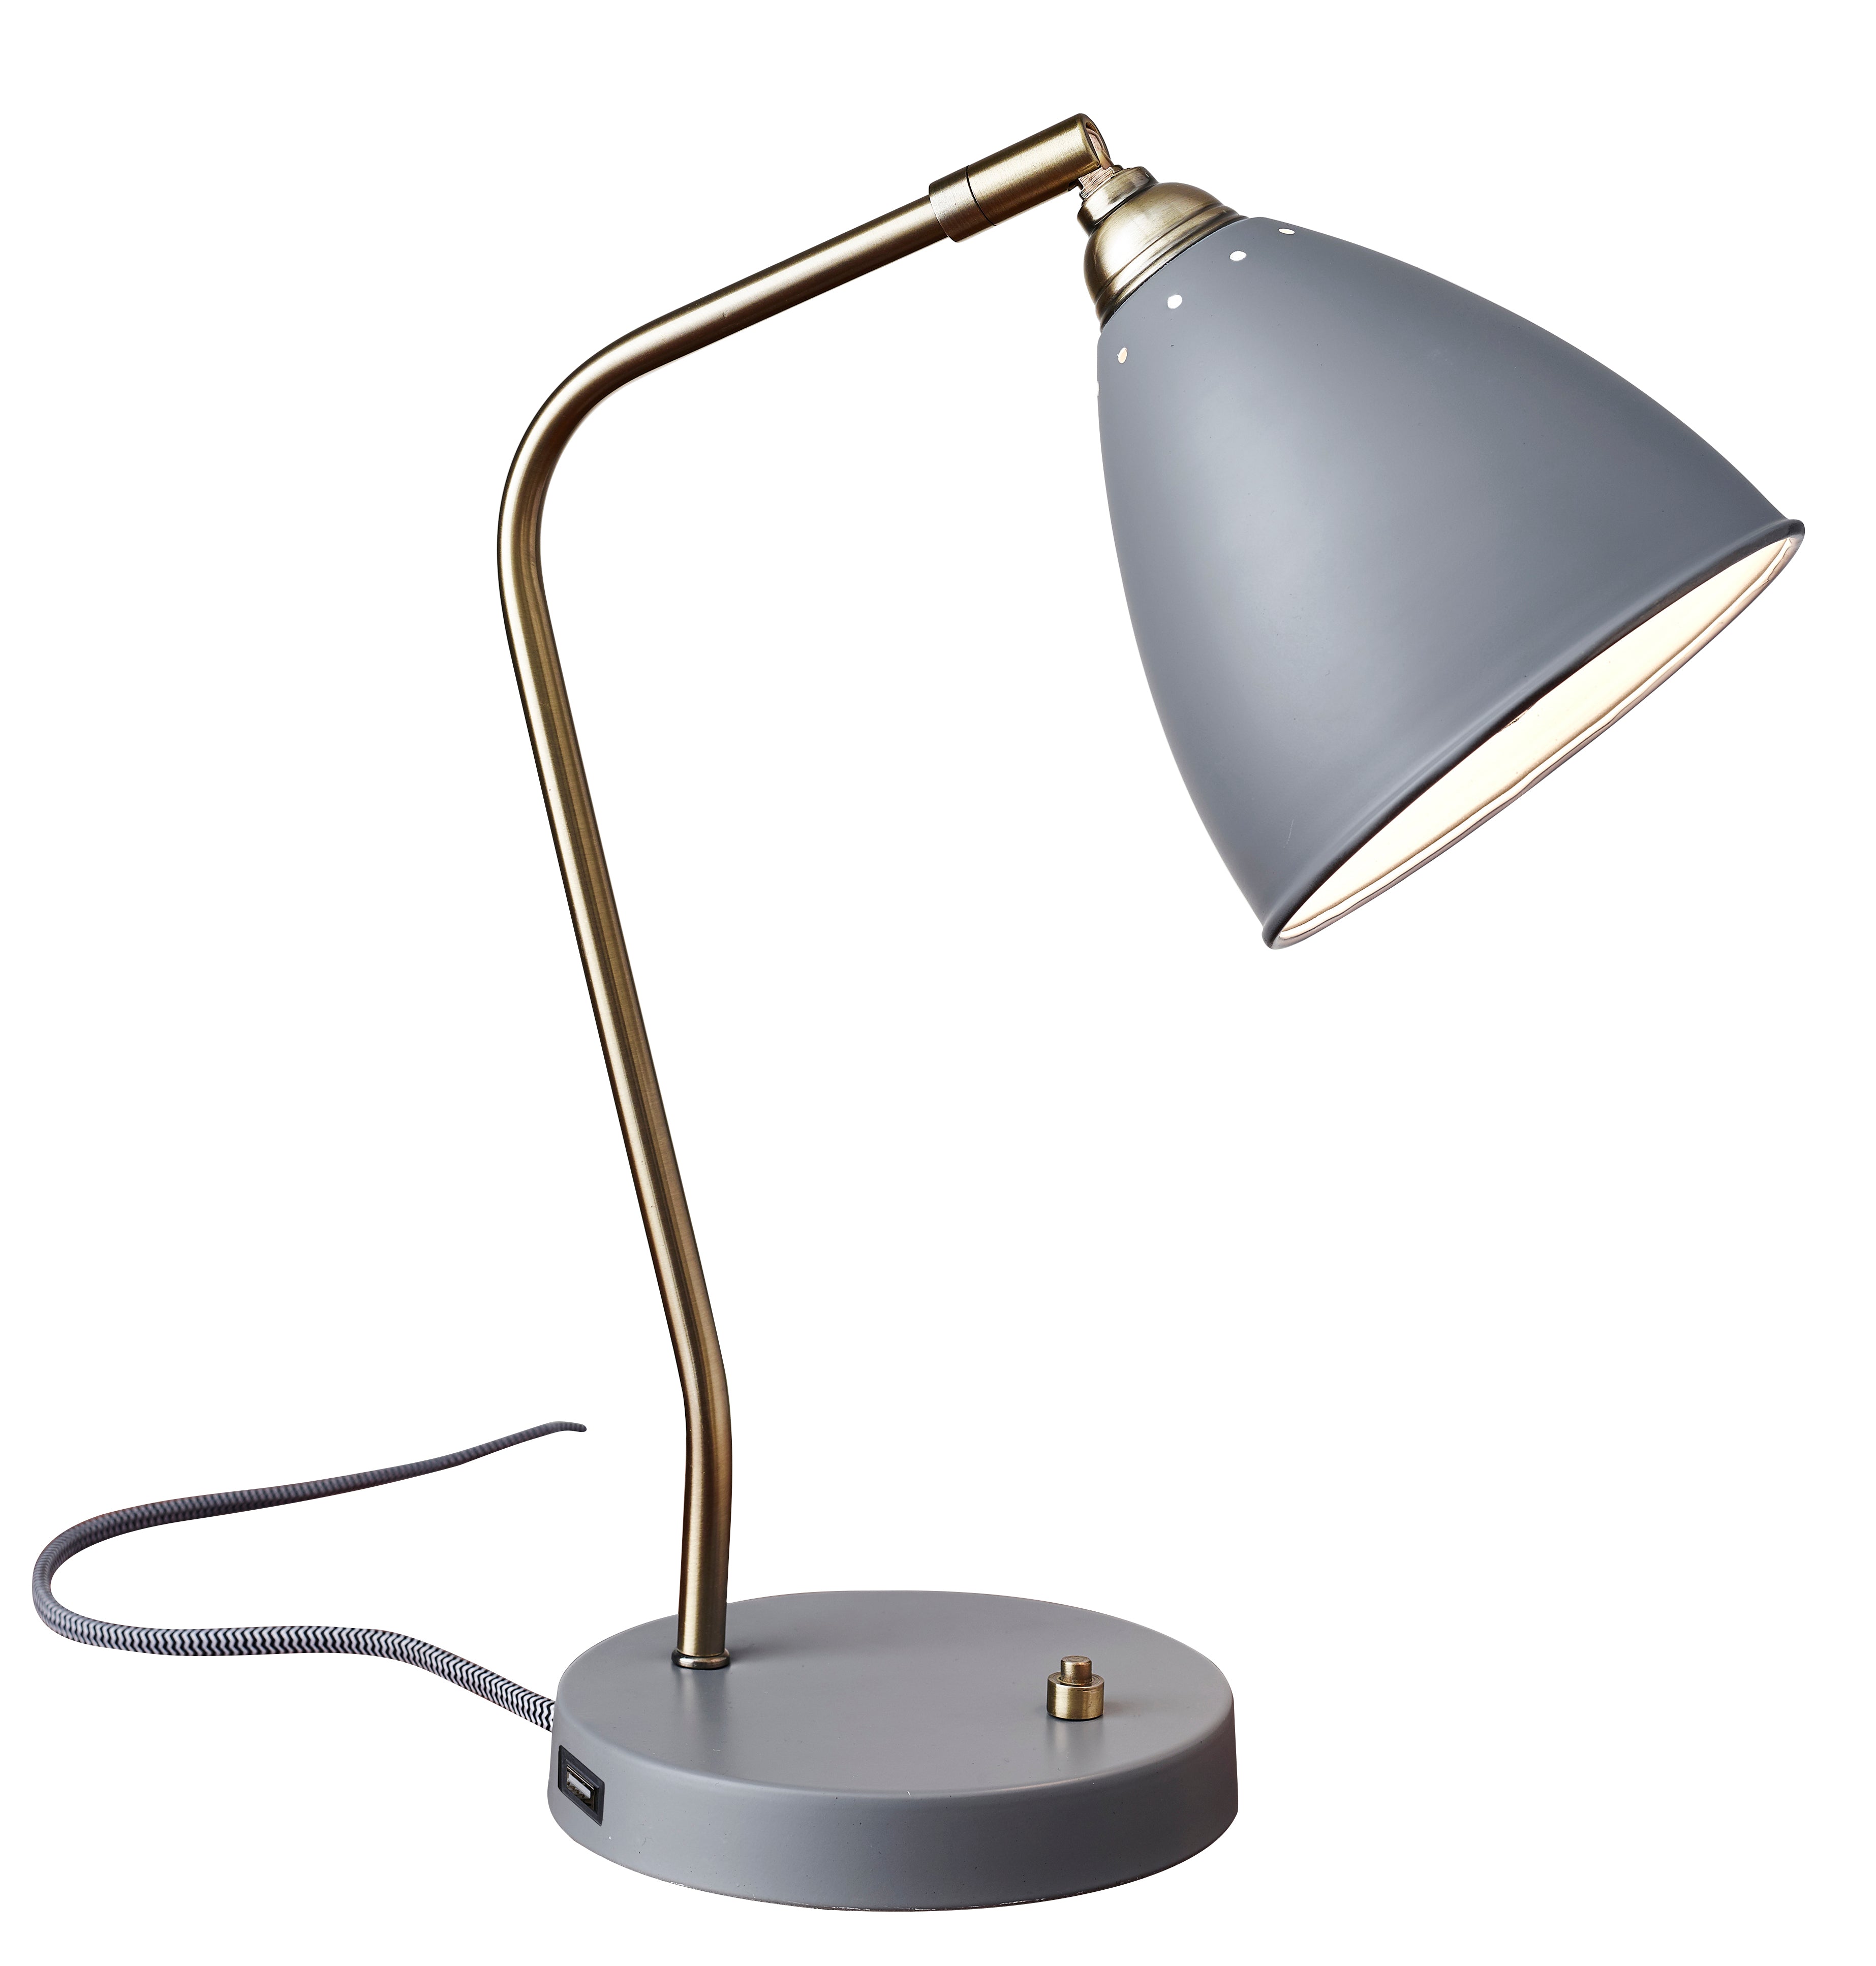 CHELSEA Lampe sur table Or, Grey - 3463-03 | ADESSO